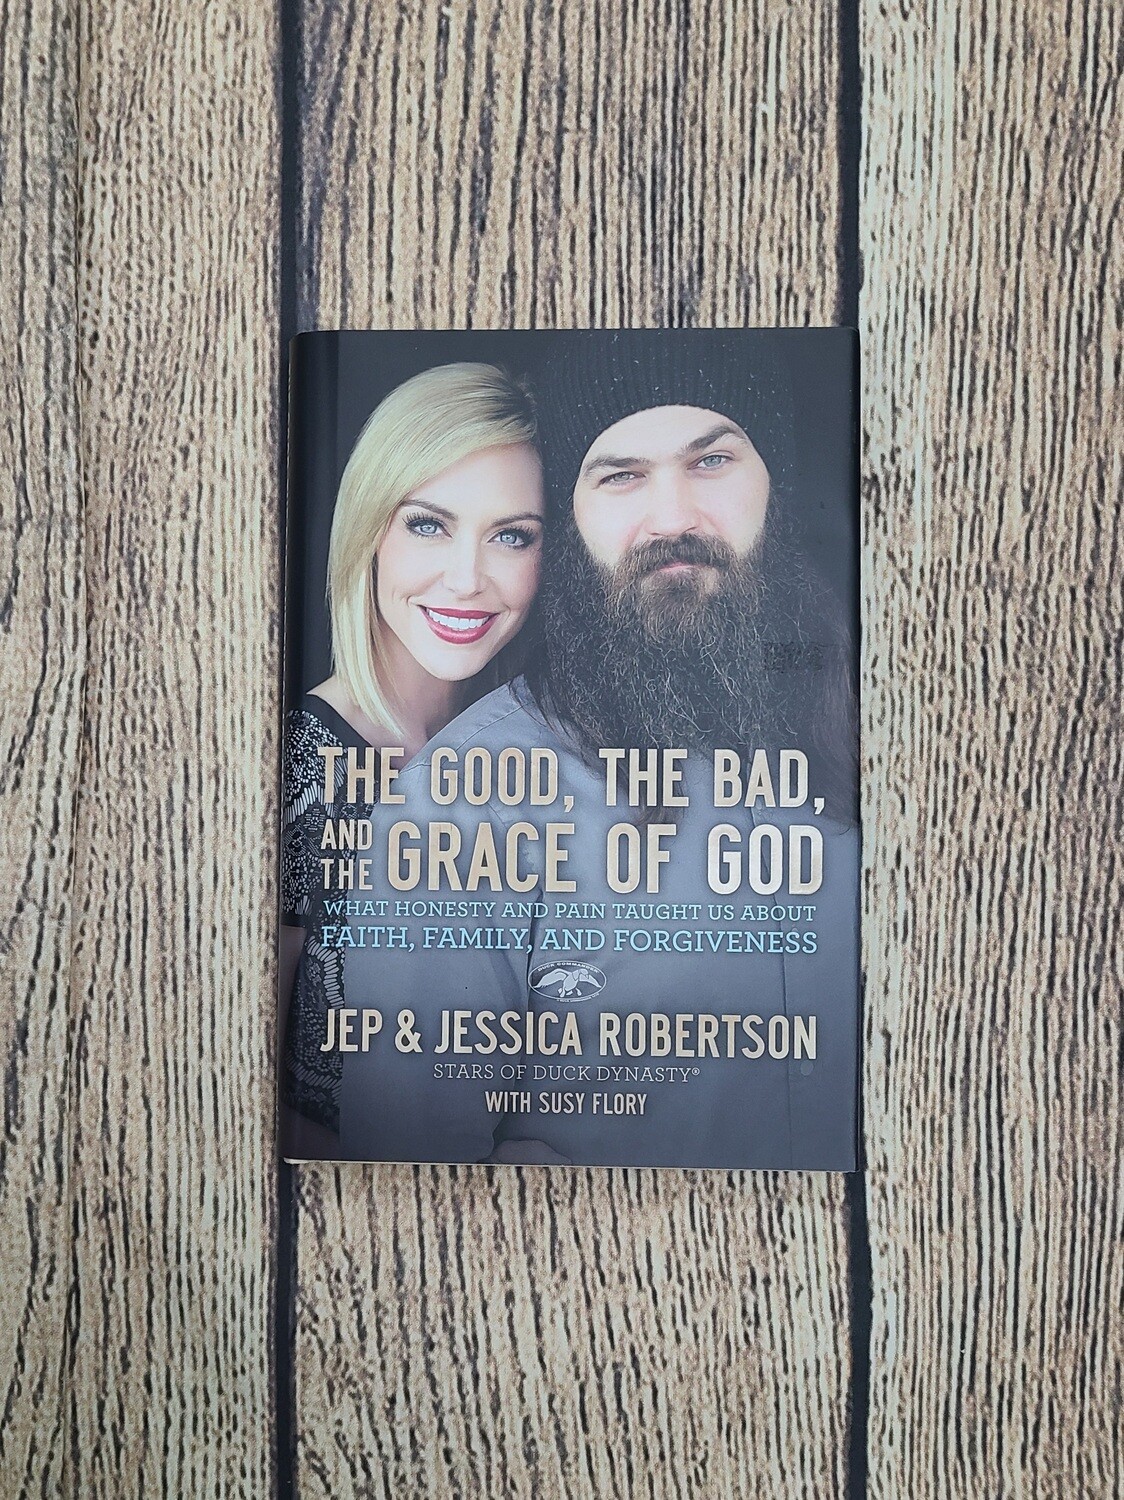 The Good, The Bad, and the Grace of God by Jep and Jessica Robertson with Susy Flory